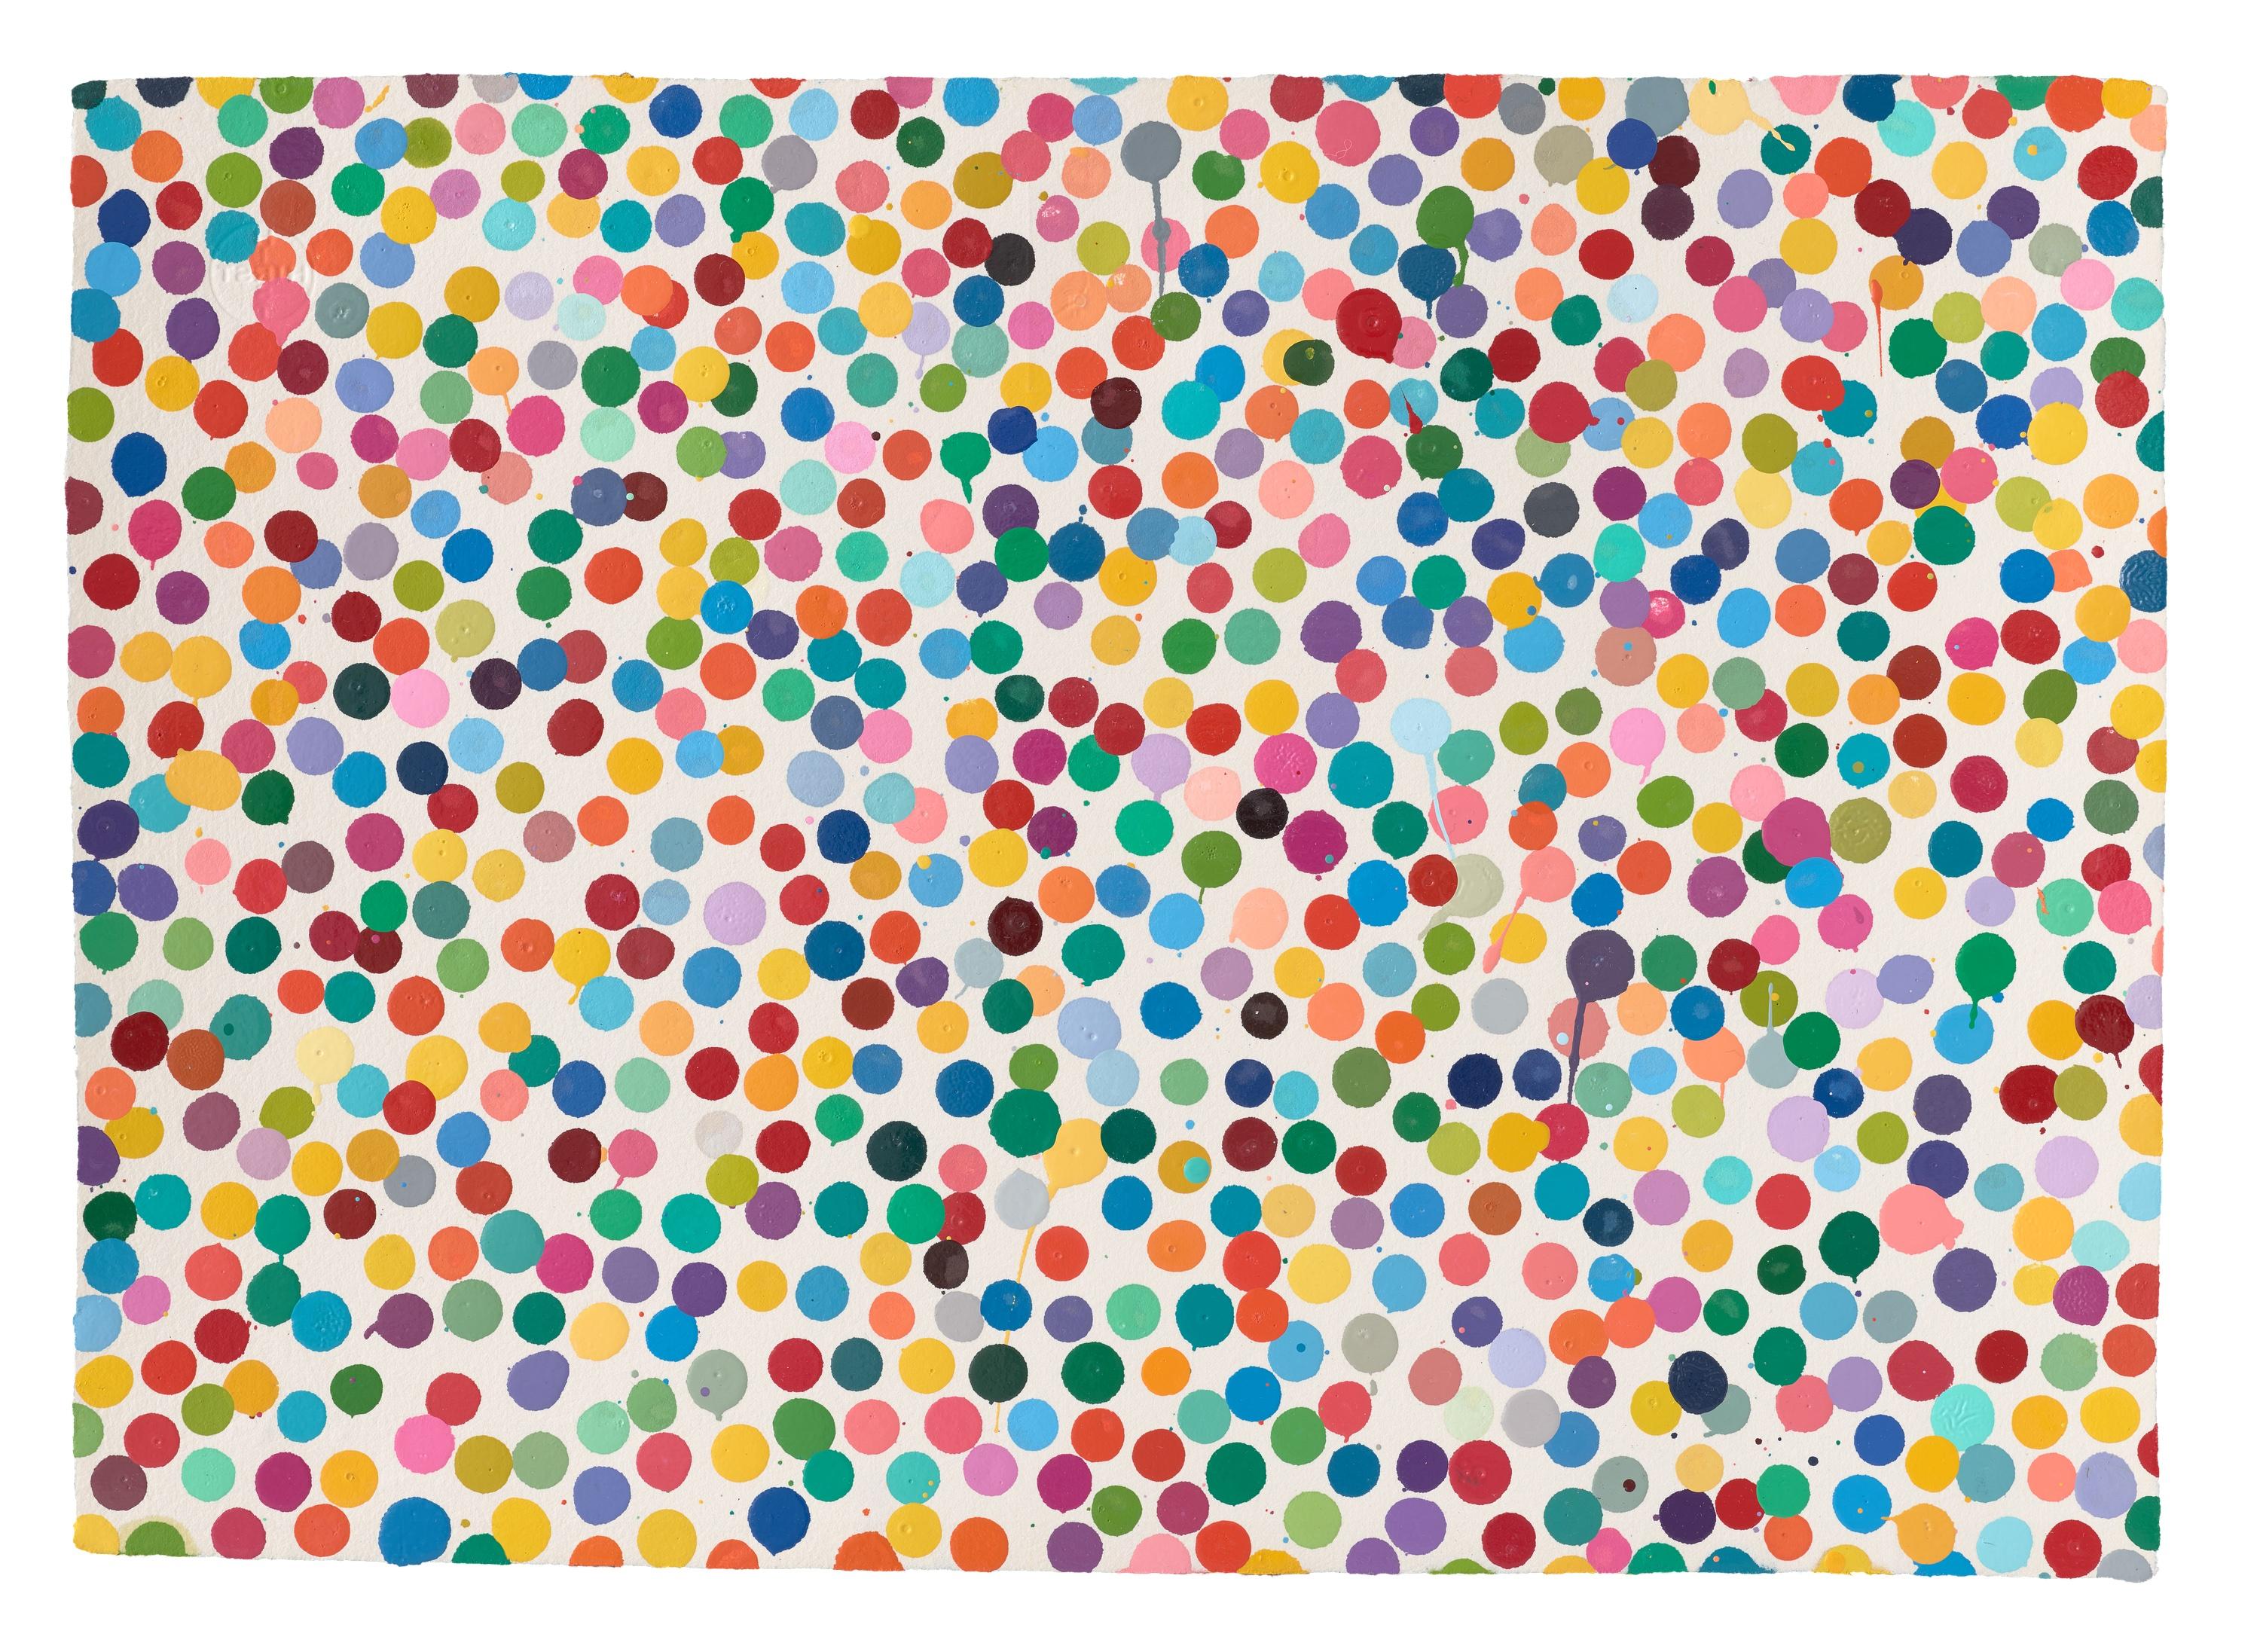 Damien Hirst Abstract Painting - 9805. Fly by force. (From The Currency).